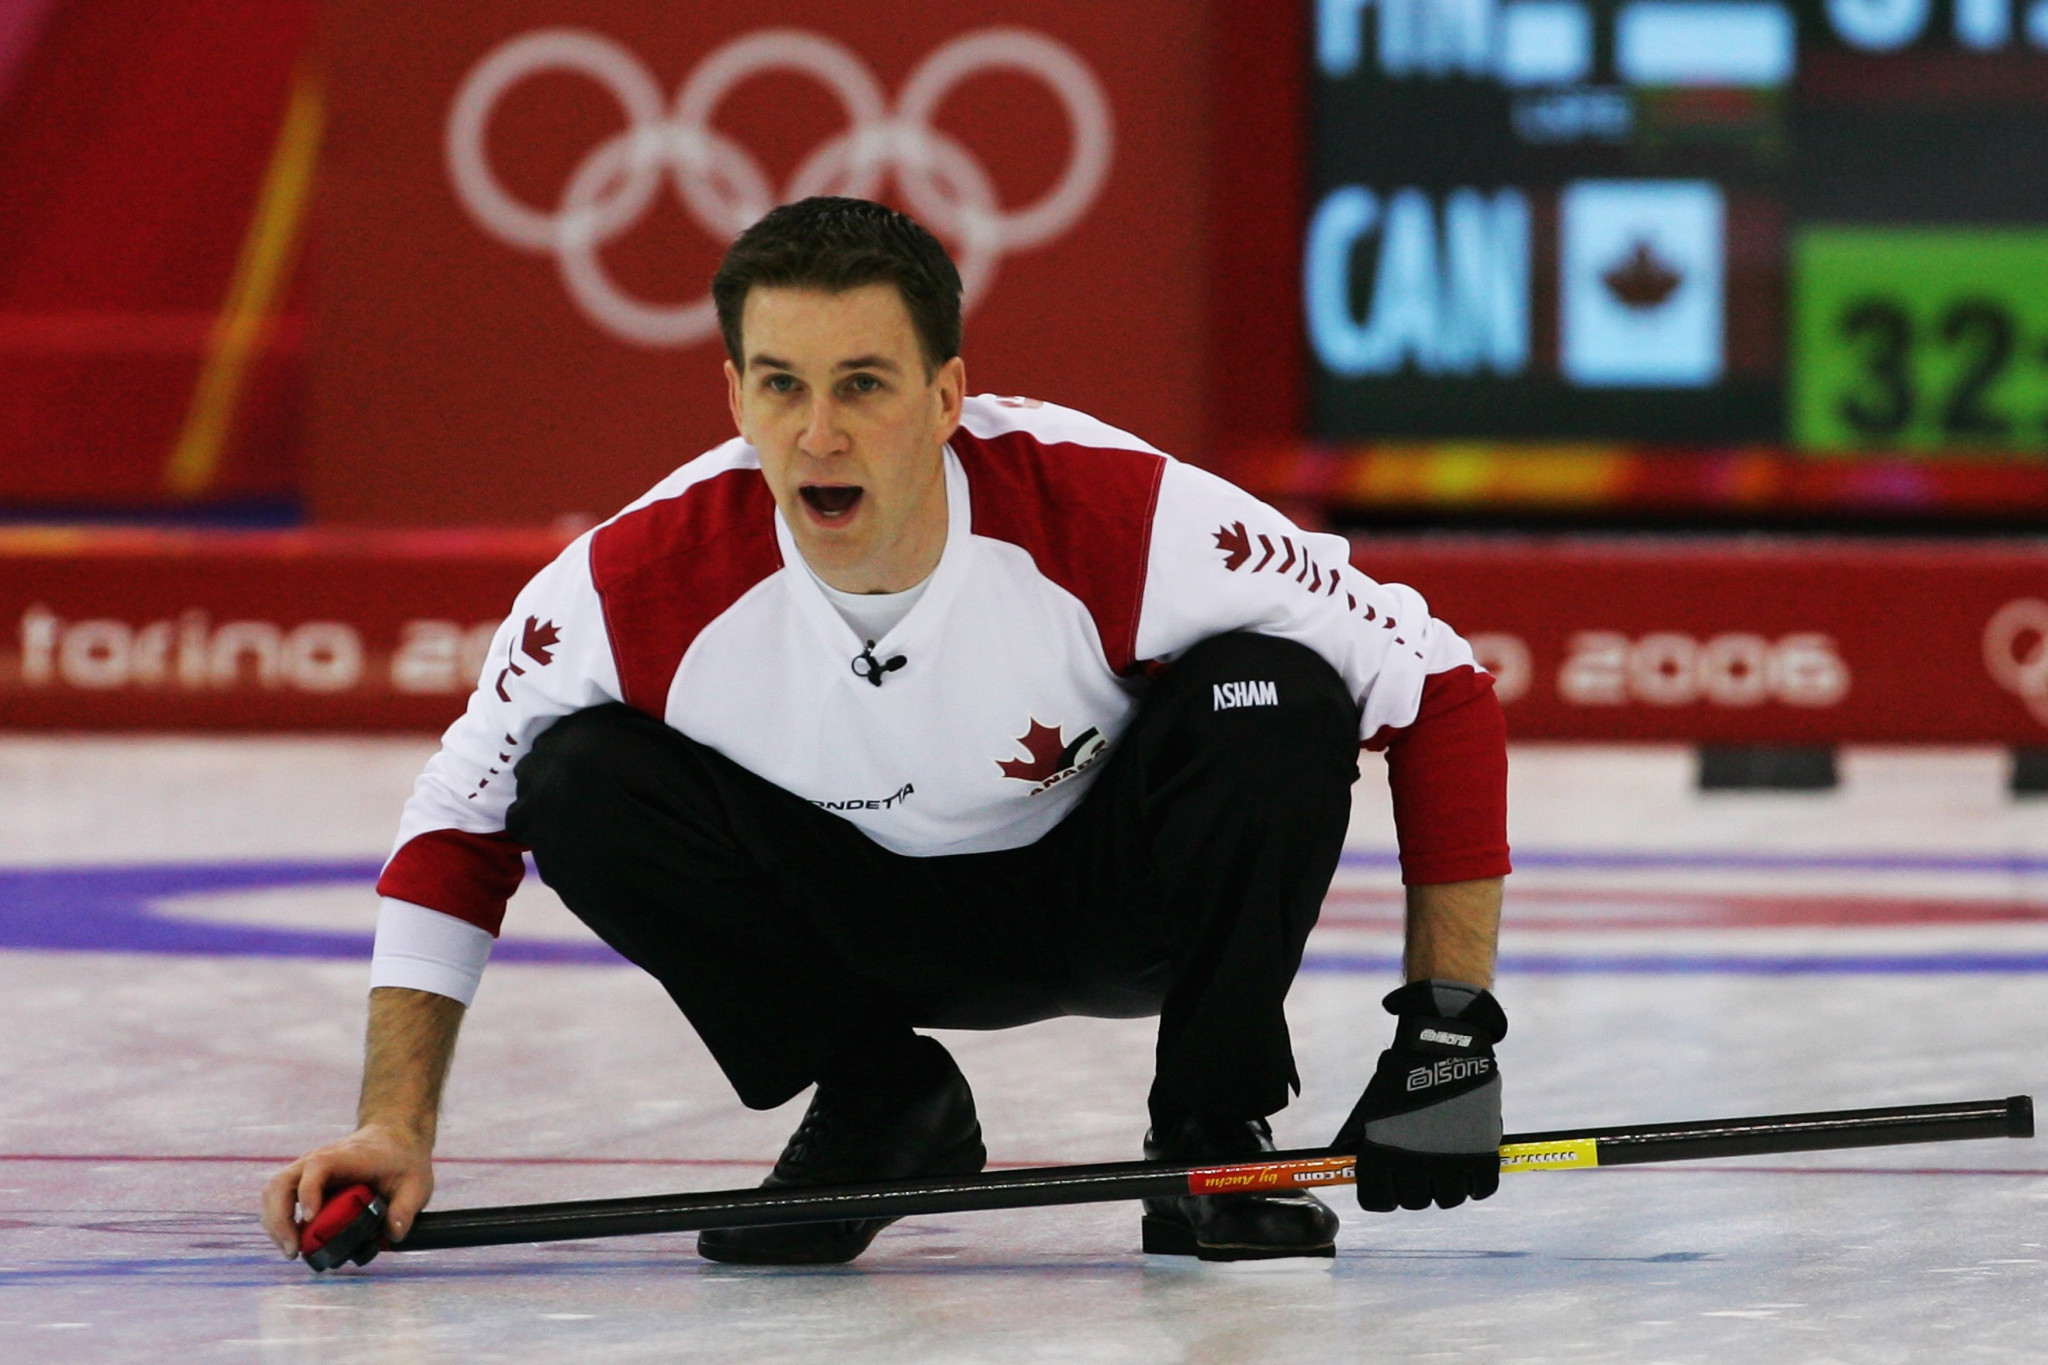 Turin 2006 Olympic champion Brad Gushue also opened with victory ©Getty Images